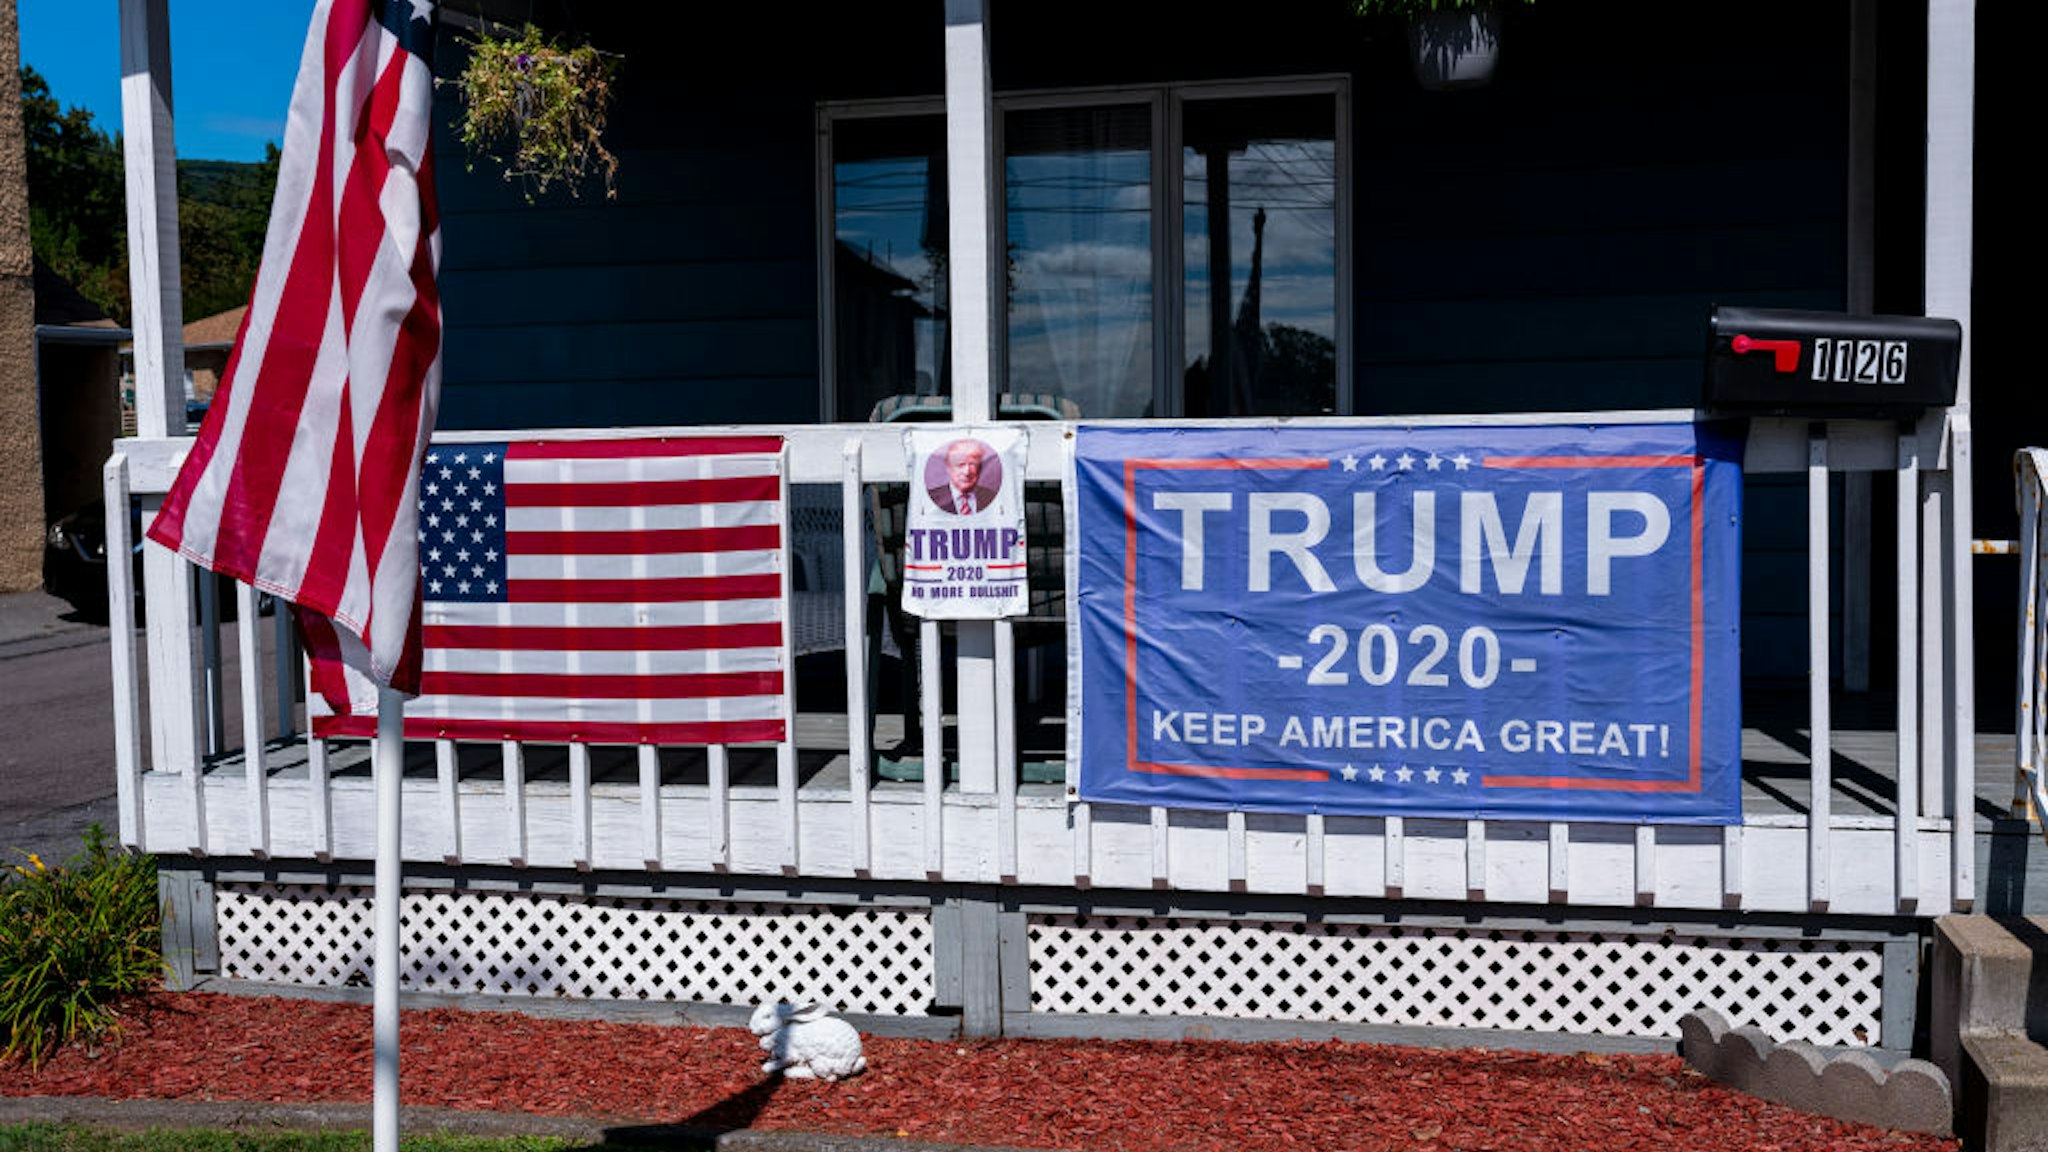 Political posters favoring U.S. presidential candidate President Donald Trump are attached to a railing September 11, 2020 in Scranton, Pennsylvania.